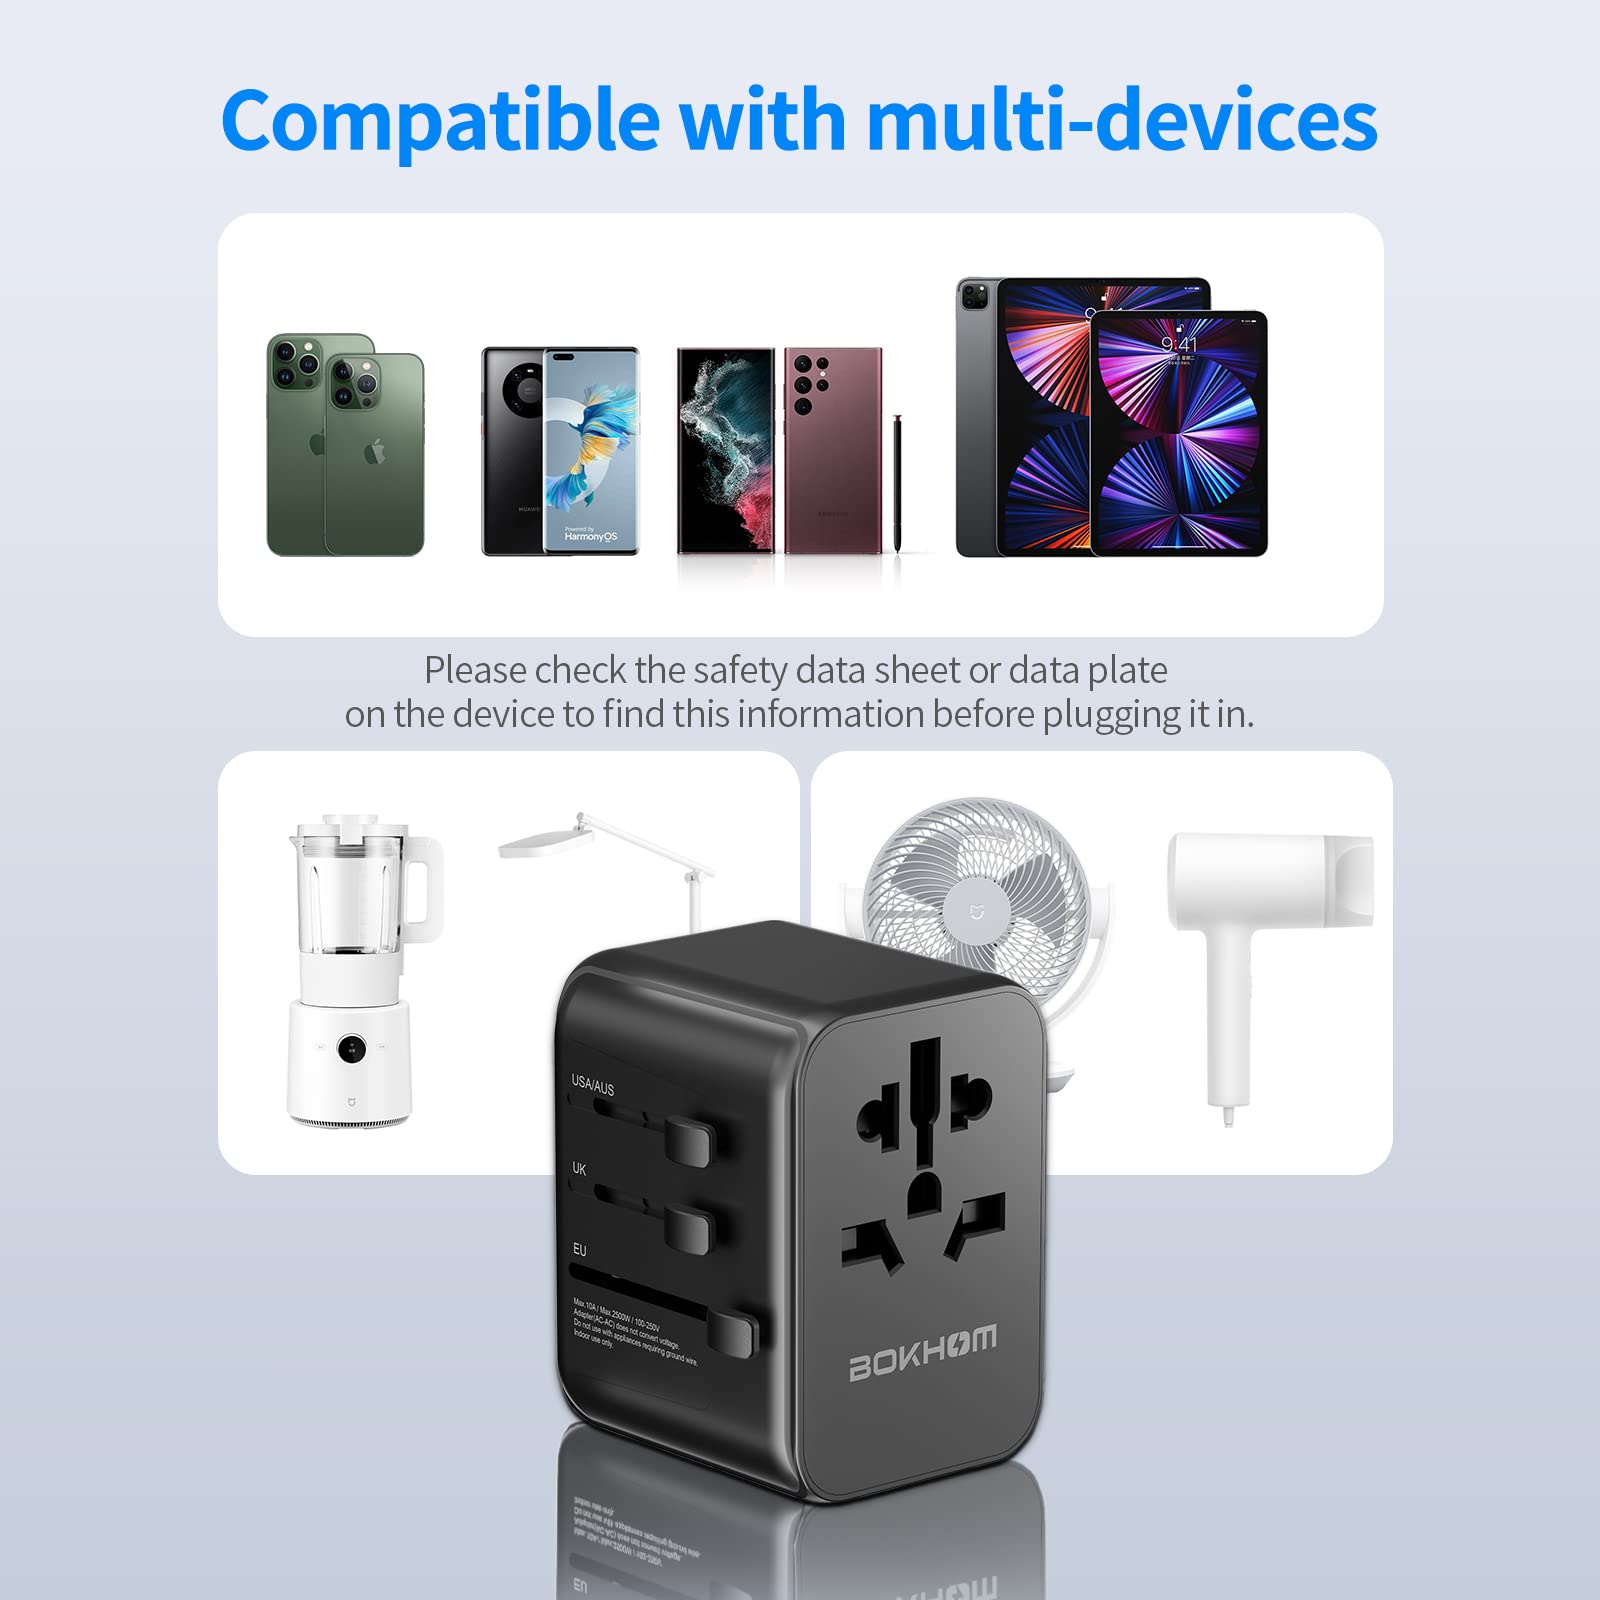 Worldwide Travel Adapter with USB C and USB A Port , All-in-one Universal Plug Adapter with Carry Pouch Dual 10A Fuses Surge Protection International Power Adapter 4 Plugs Trips to US AU Europe UK